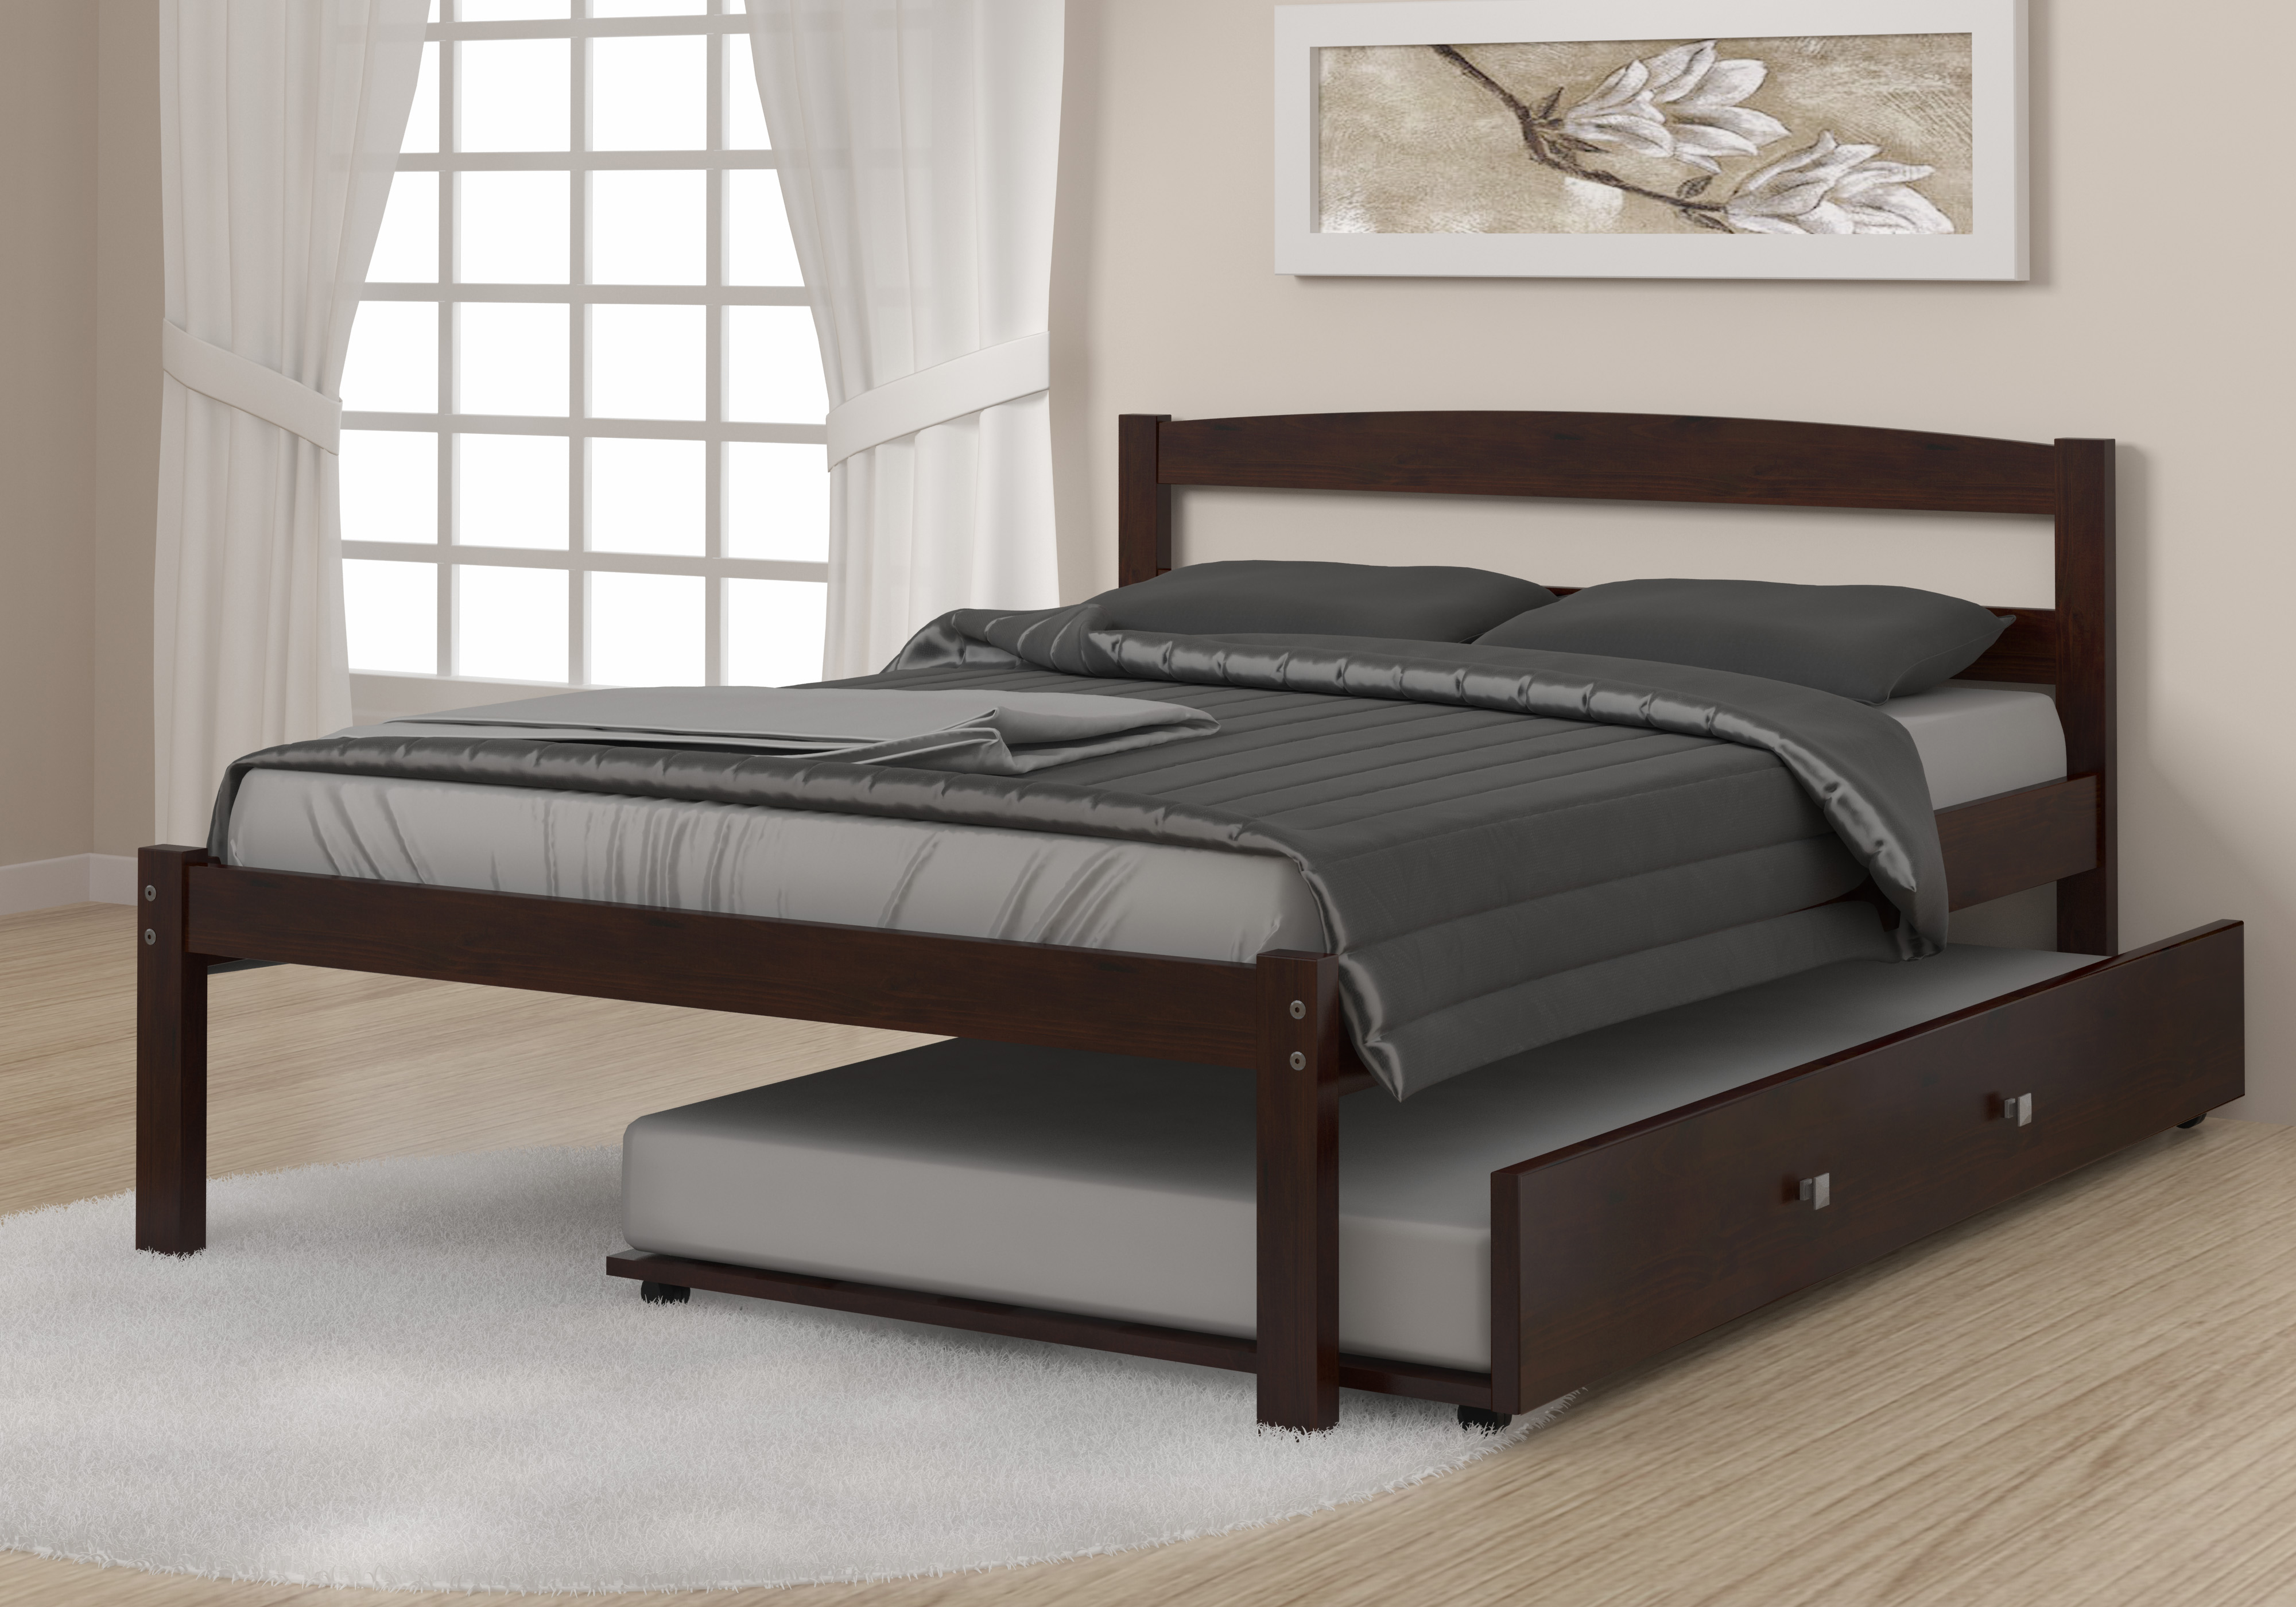 Donco Trading Company Econo Full Bed With Trundle Bed